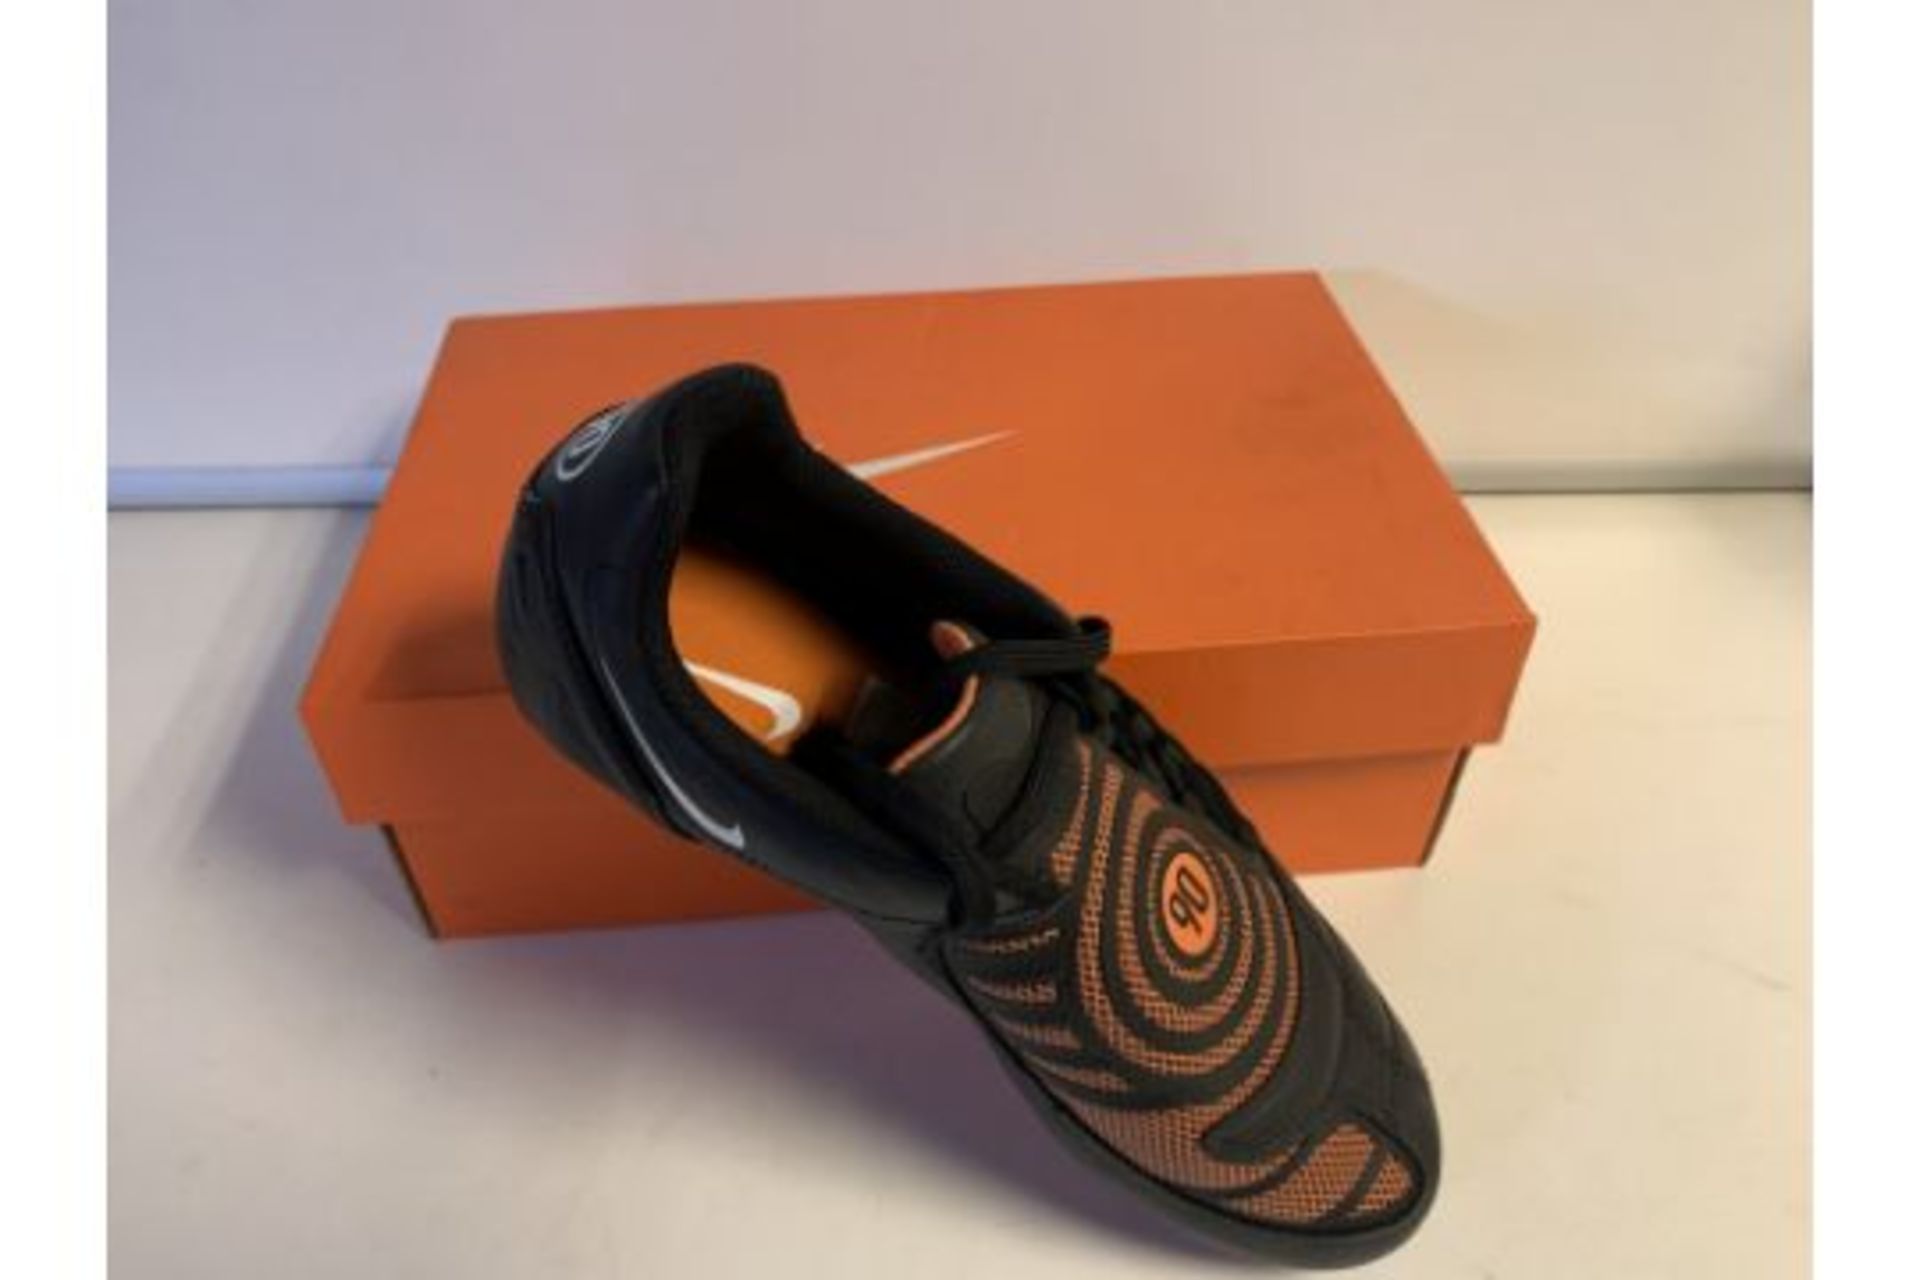 (NO VAT) 3 X BRAND NEW RETAIL BOXED NIKE JR TOTAL 90 SHOOT 2 EXTRA SG FOOTBALL BOOTS SIZE 5.5